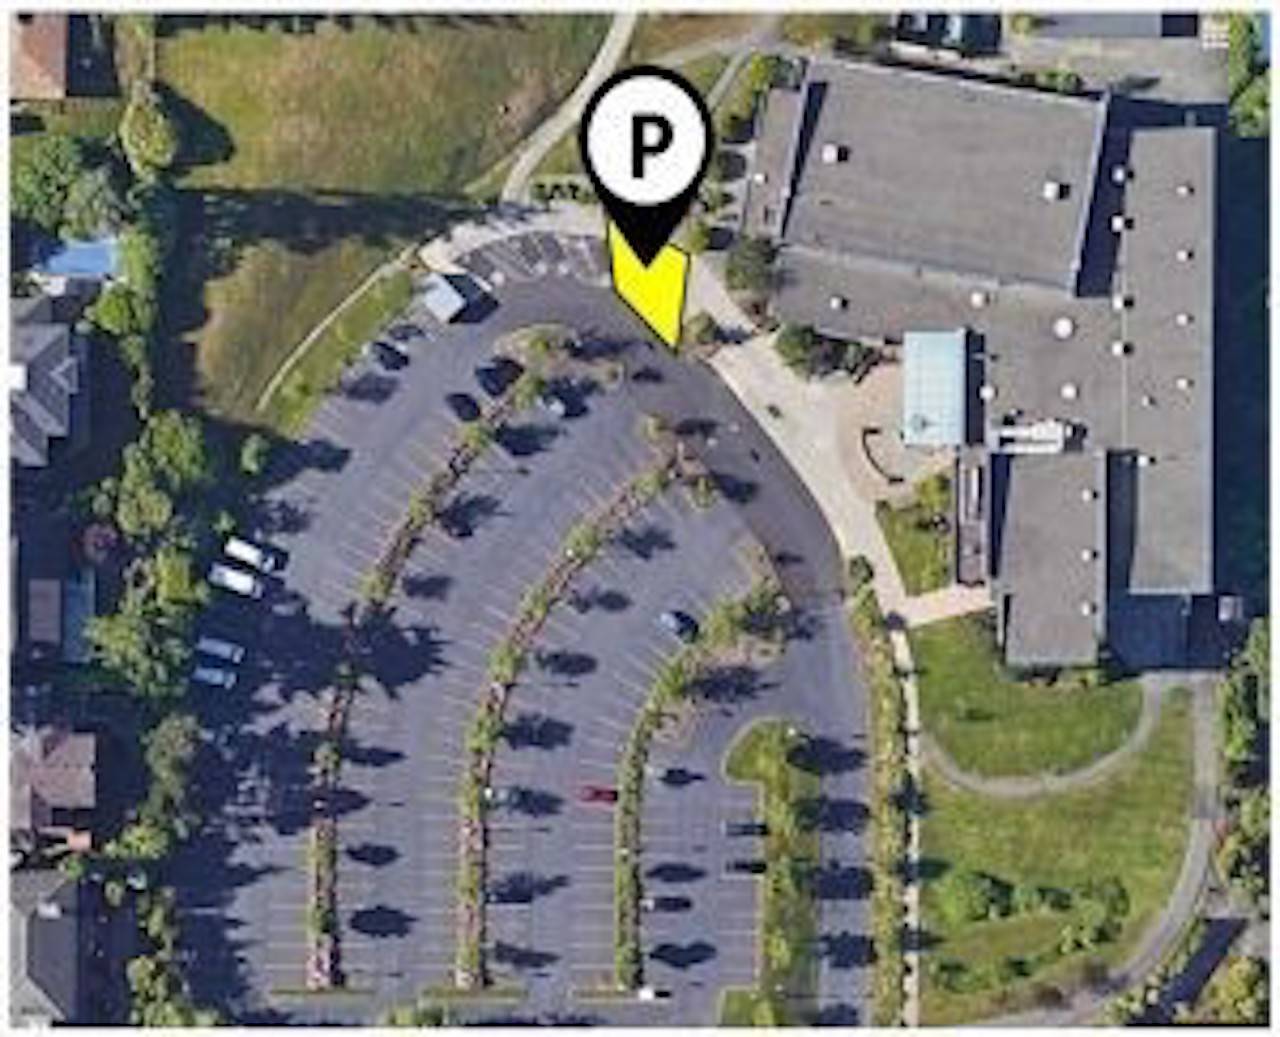 A map highlighting where pantry patrons should park to get assistance. Photo courtesy city of Mercer Island